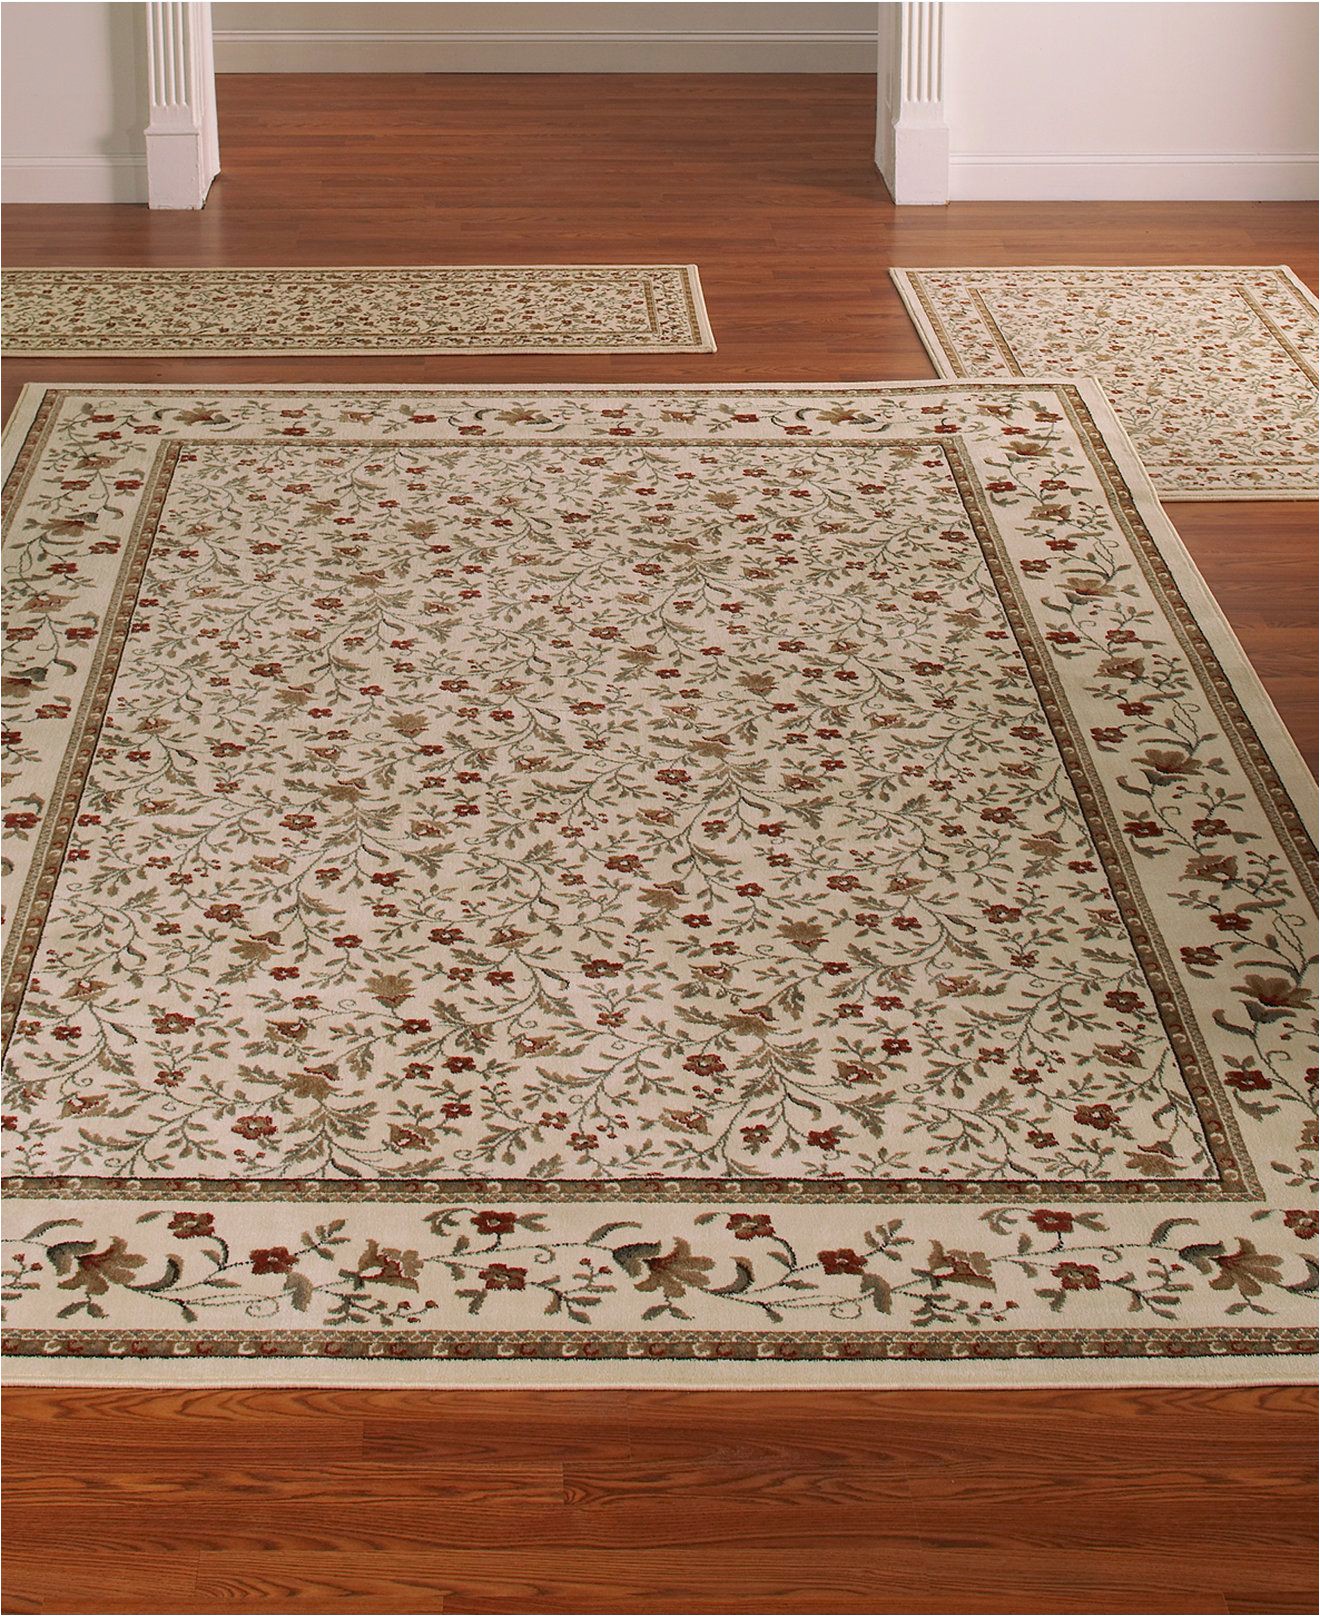 Inexpensive 8 X 10 area Rugs 5xx Error Rug Sets area Rugs 8×10 Inexpensive Authentic